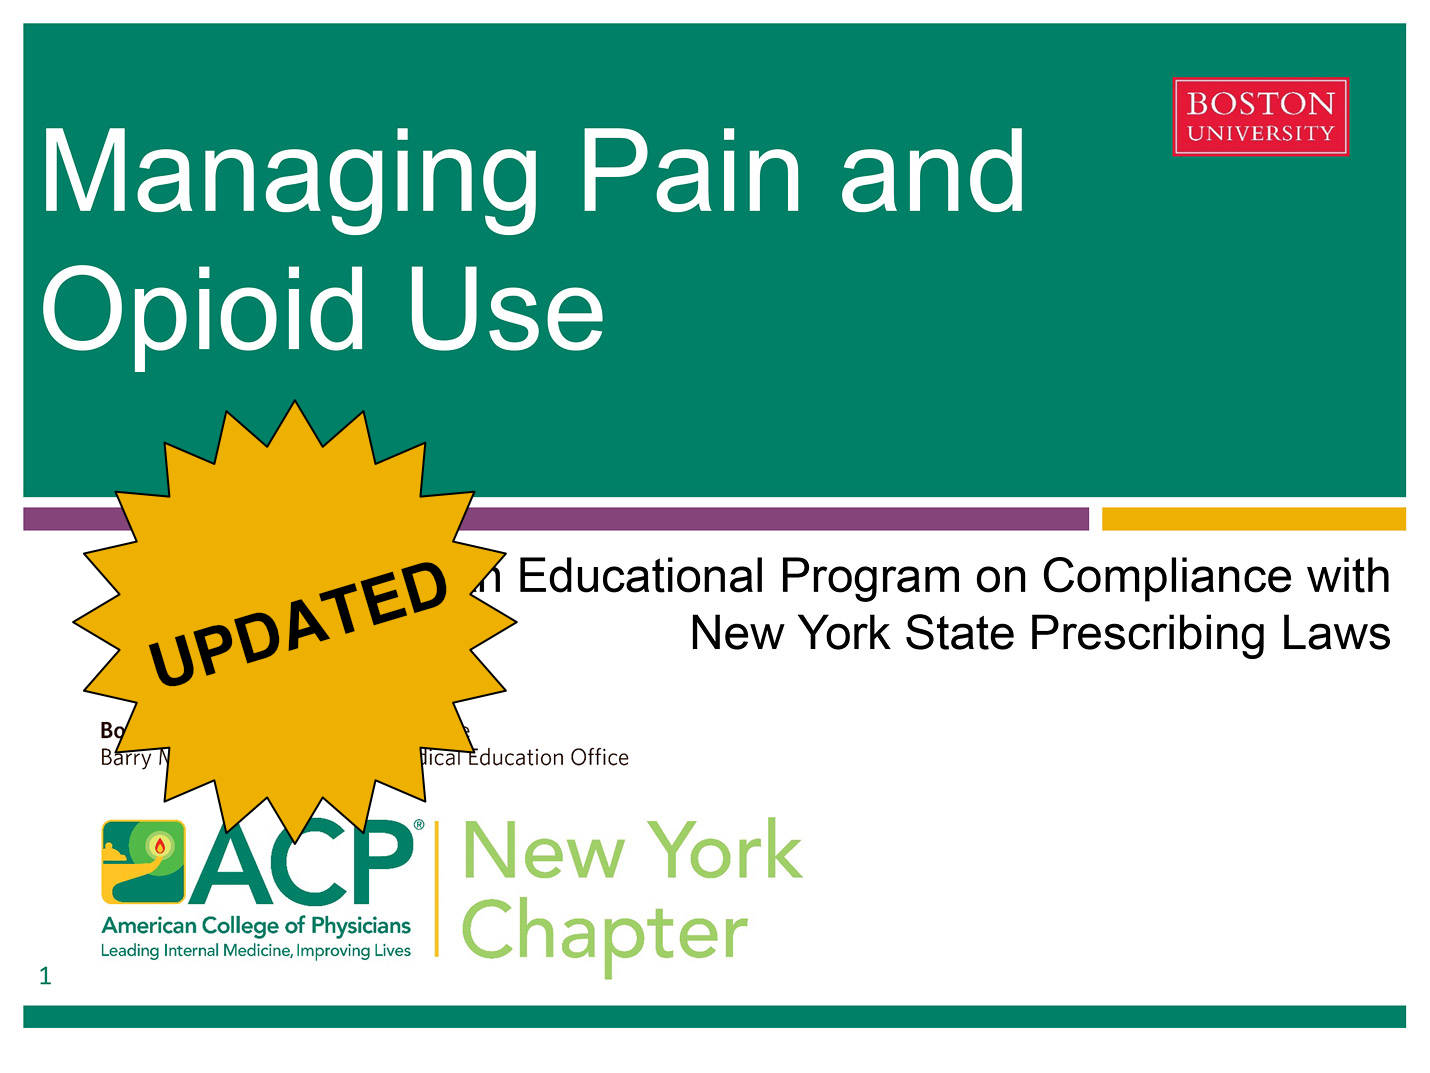 Managing Pain and Opioid Use: An Educational Program on Compliance with NYS Prescribing Laws